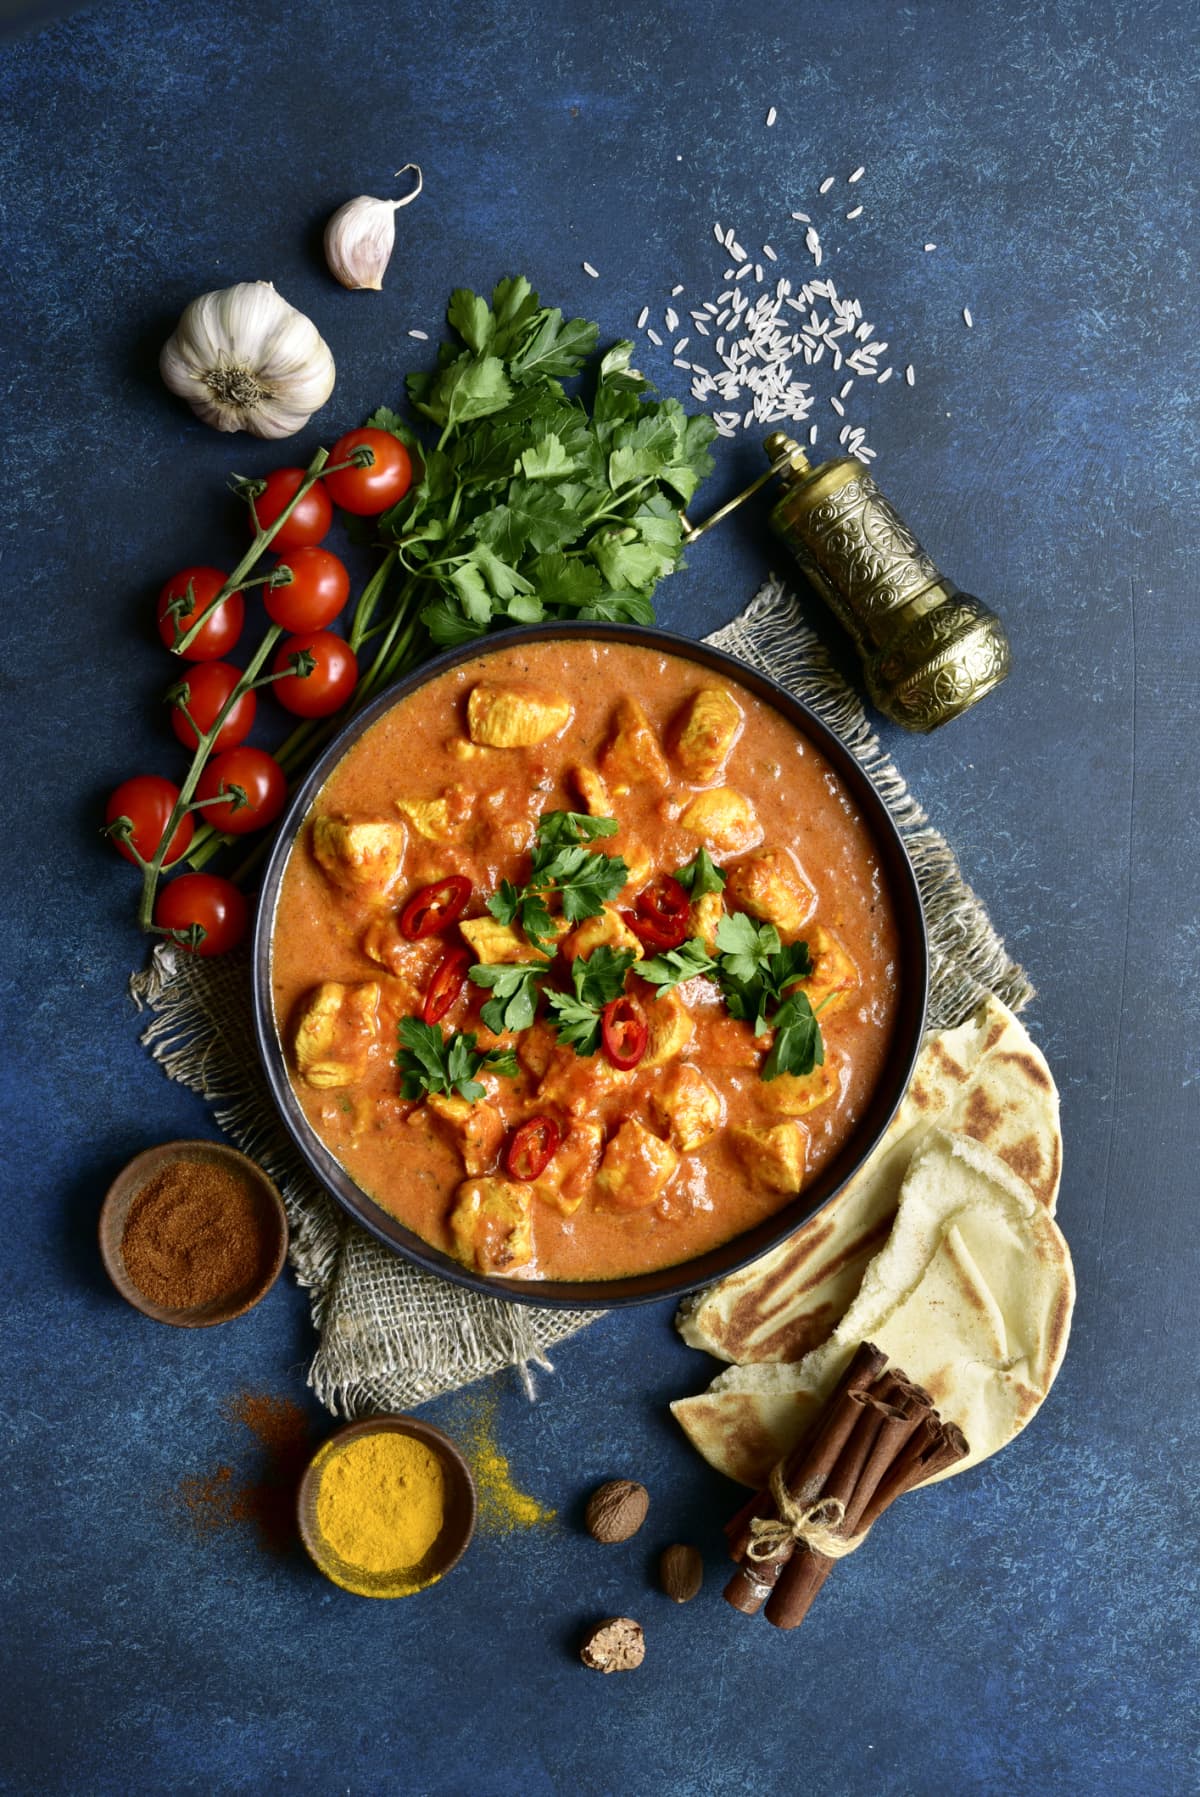 Chicken tikka masala with ingredients and spices